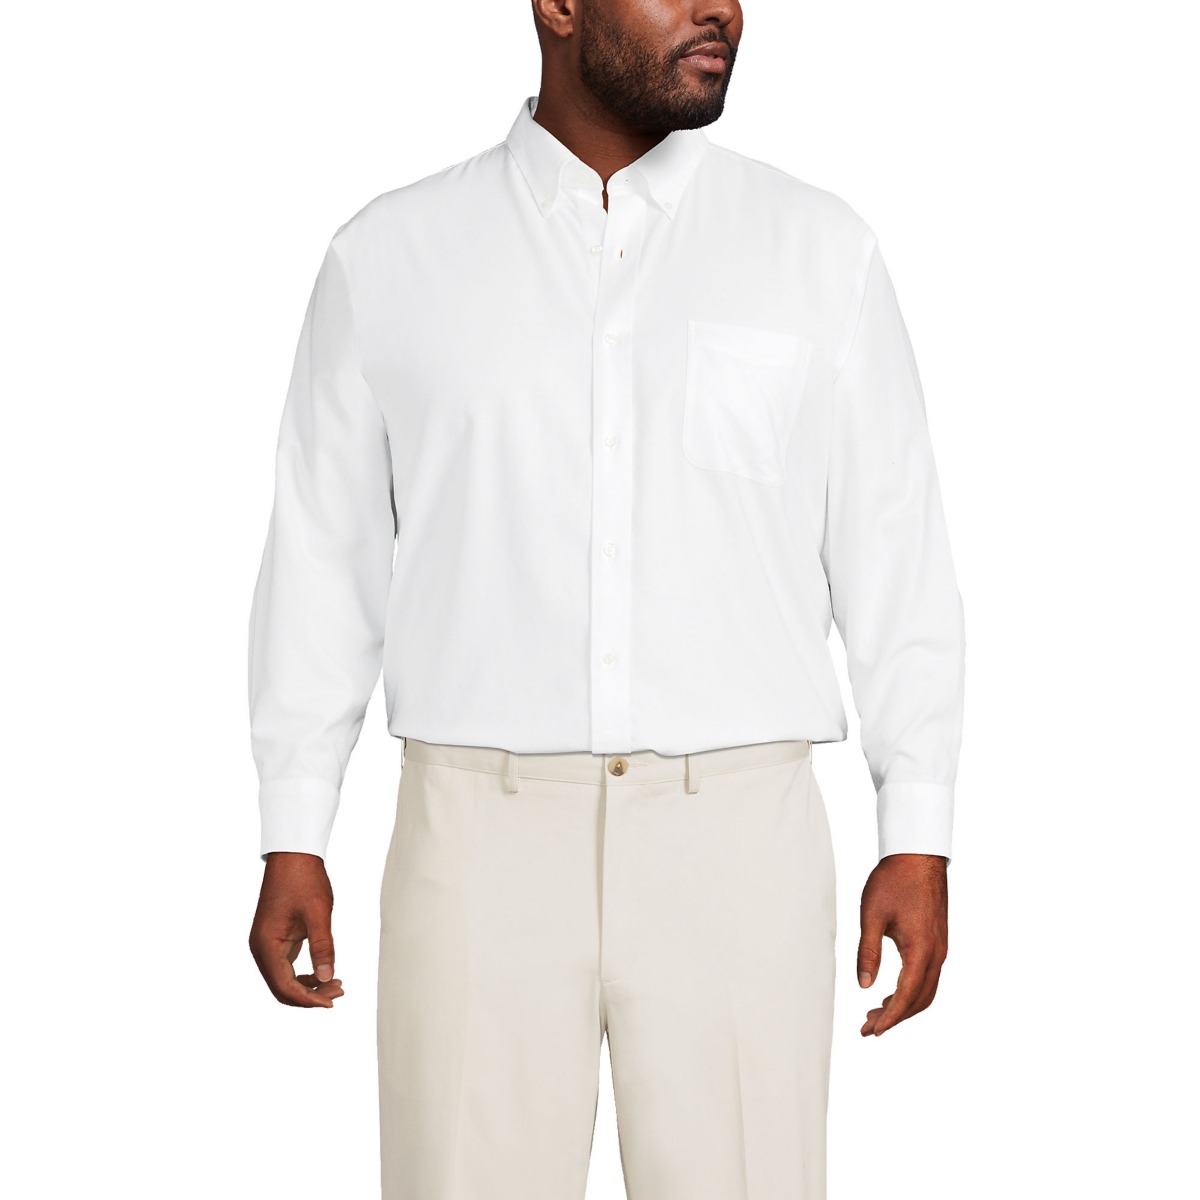 Big & Tall Traditional Fit Solid No Iron Supima Oxford Dress Shirt - White